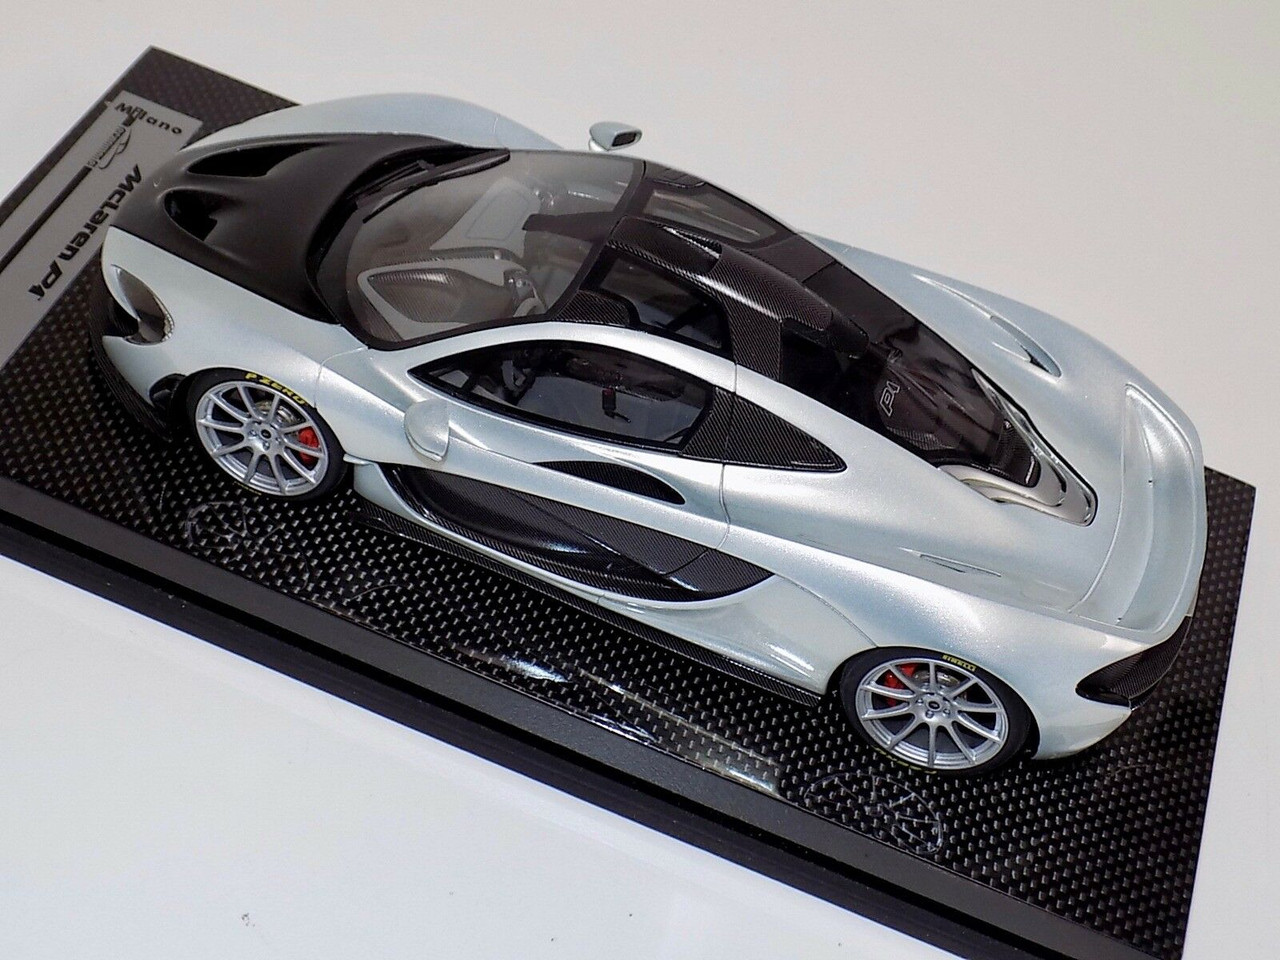 1/18 Tecnomodel McLaren P1 (Ice Silver with Silver wheels & Black Hood) with Carbon Base Resin Car Model Limited 01/10